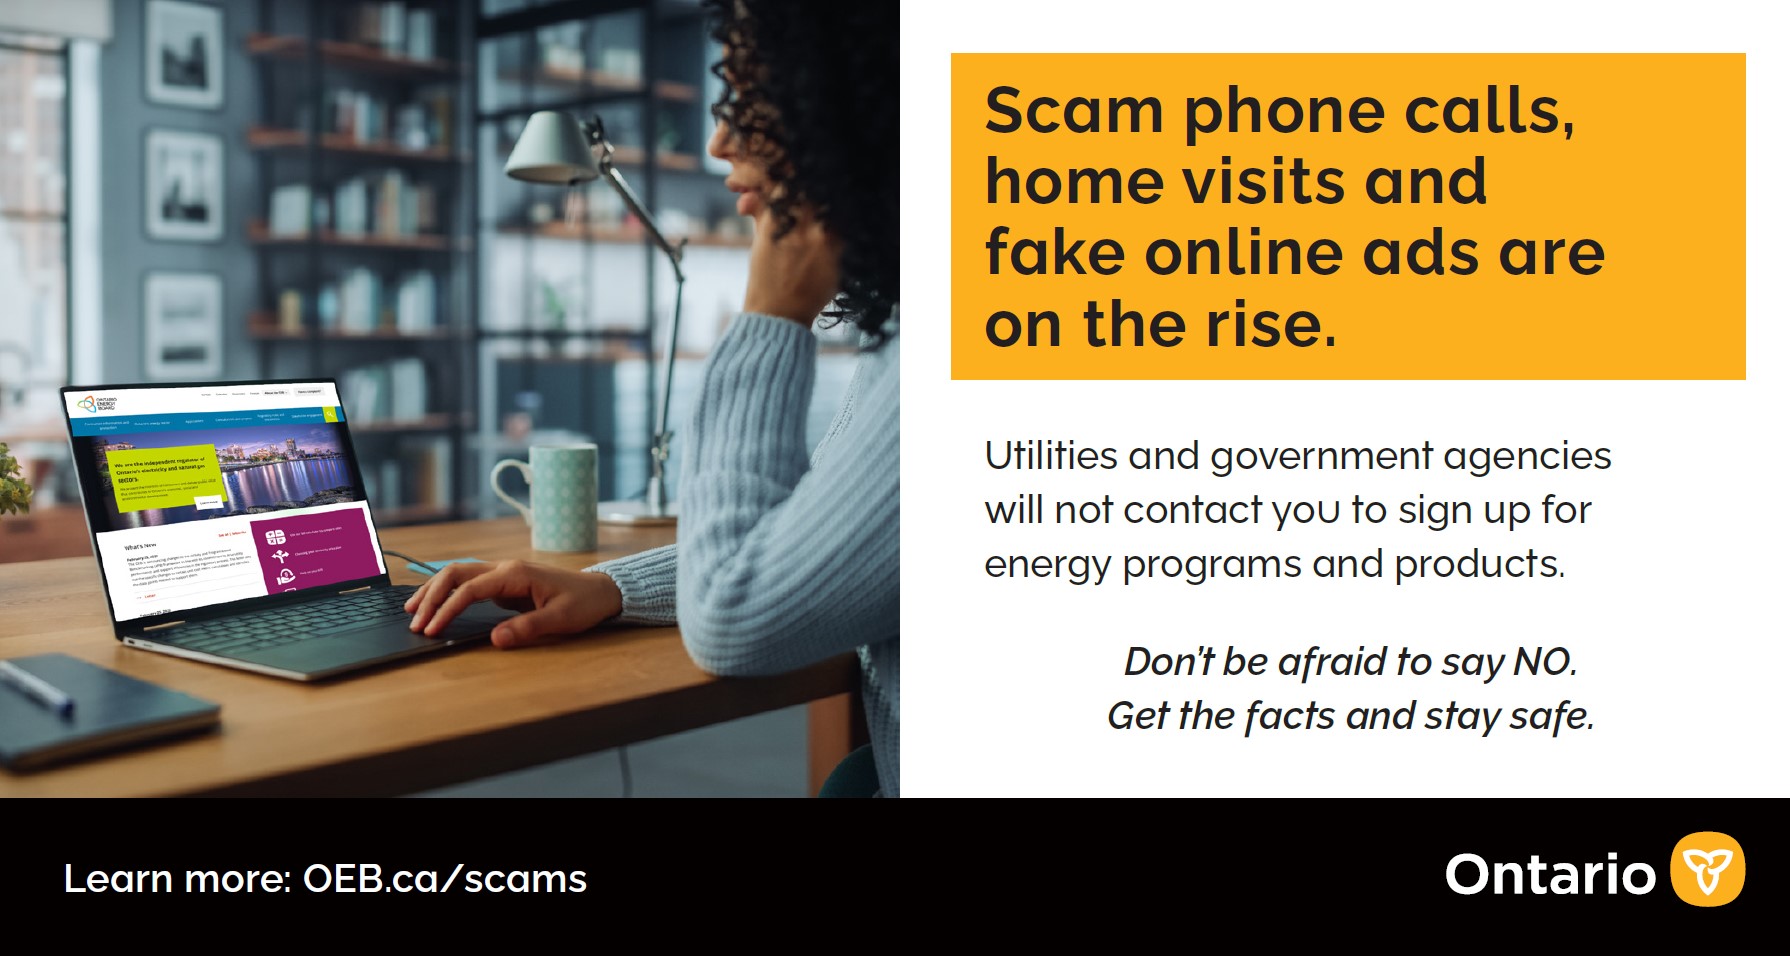 Energy Scams on the rise